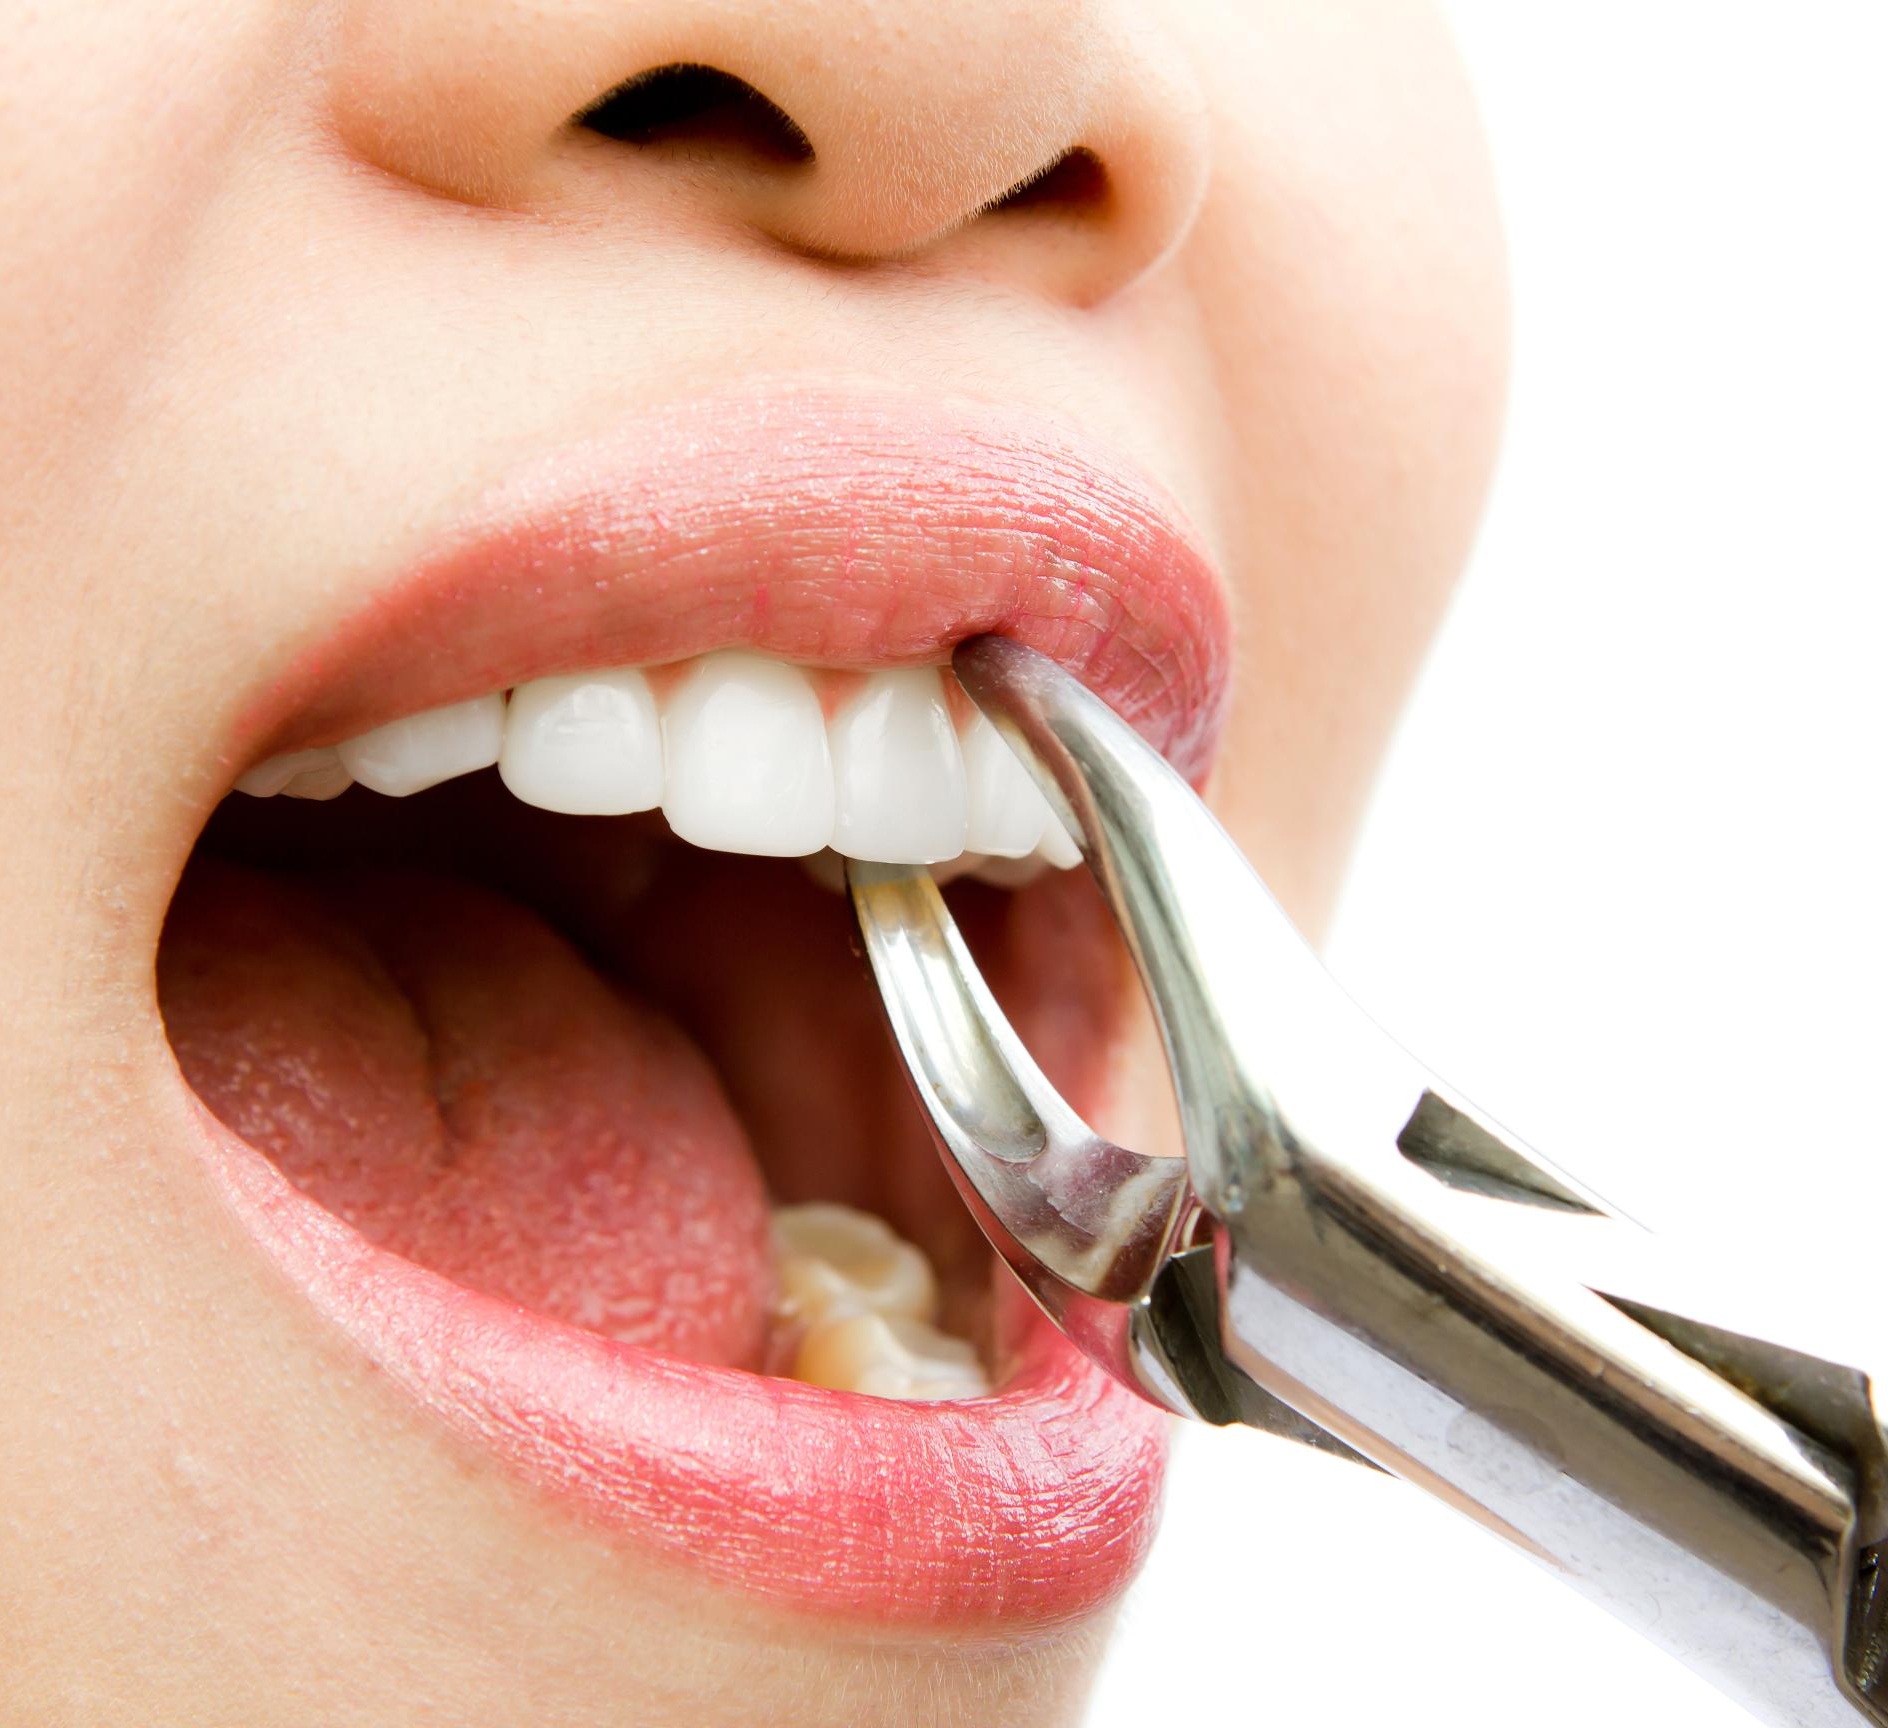 Tooth Extractions Treatment